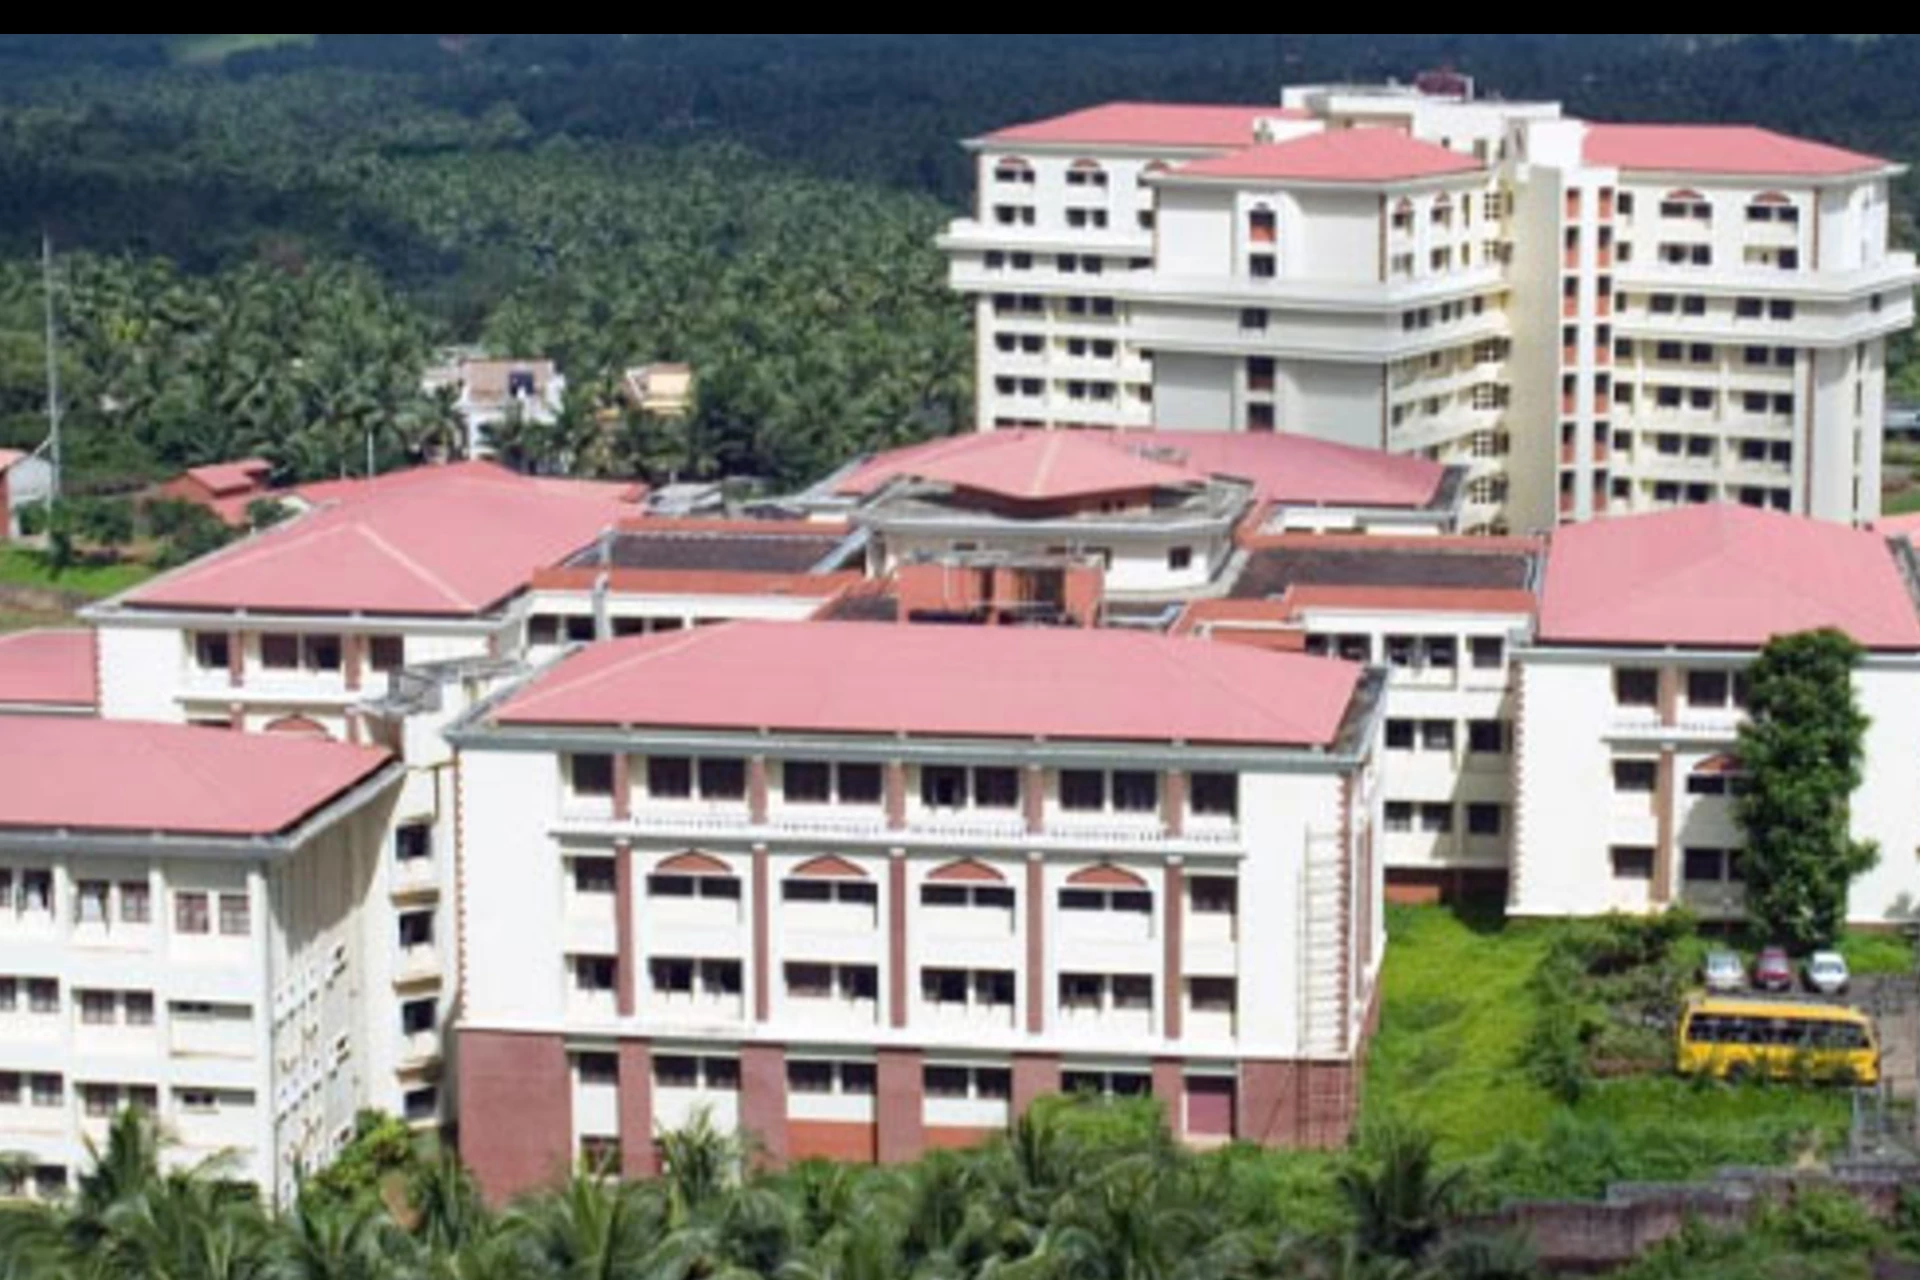 Yenepoya Medical College Mangalore Admission, Courses, Fee Structure, Placements, Rankings, Facilities